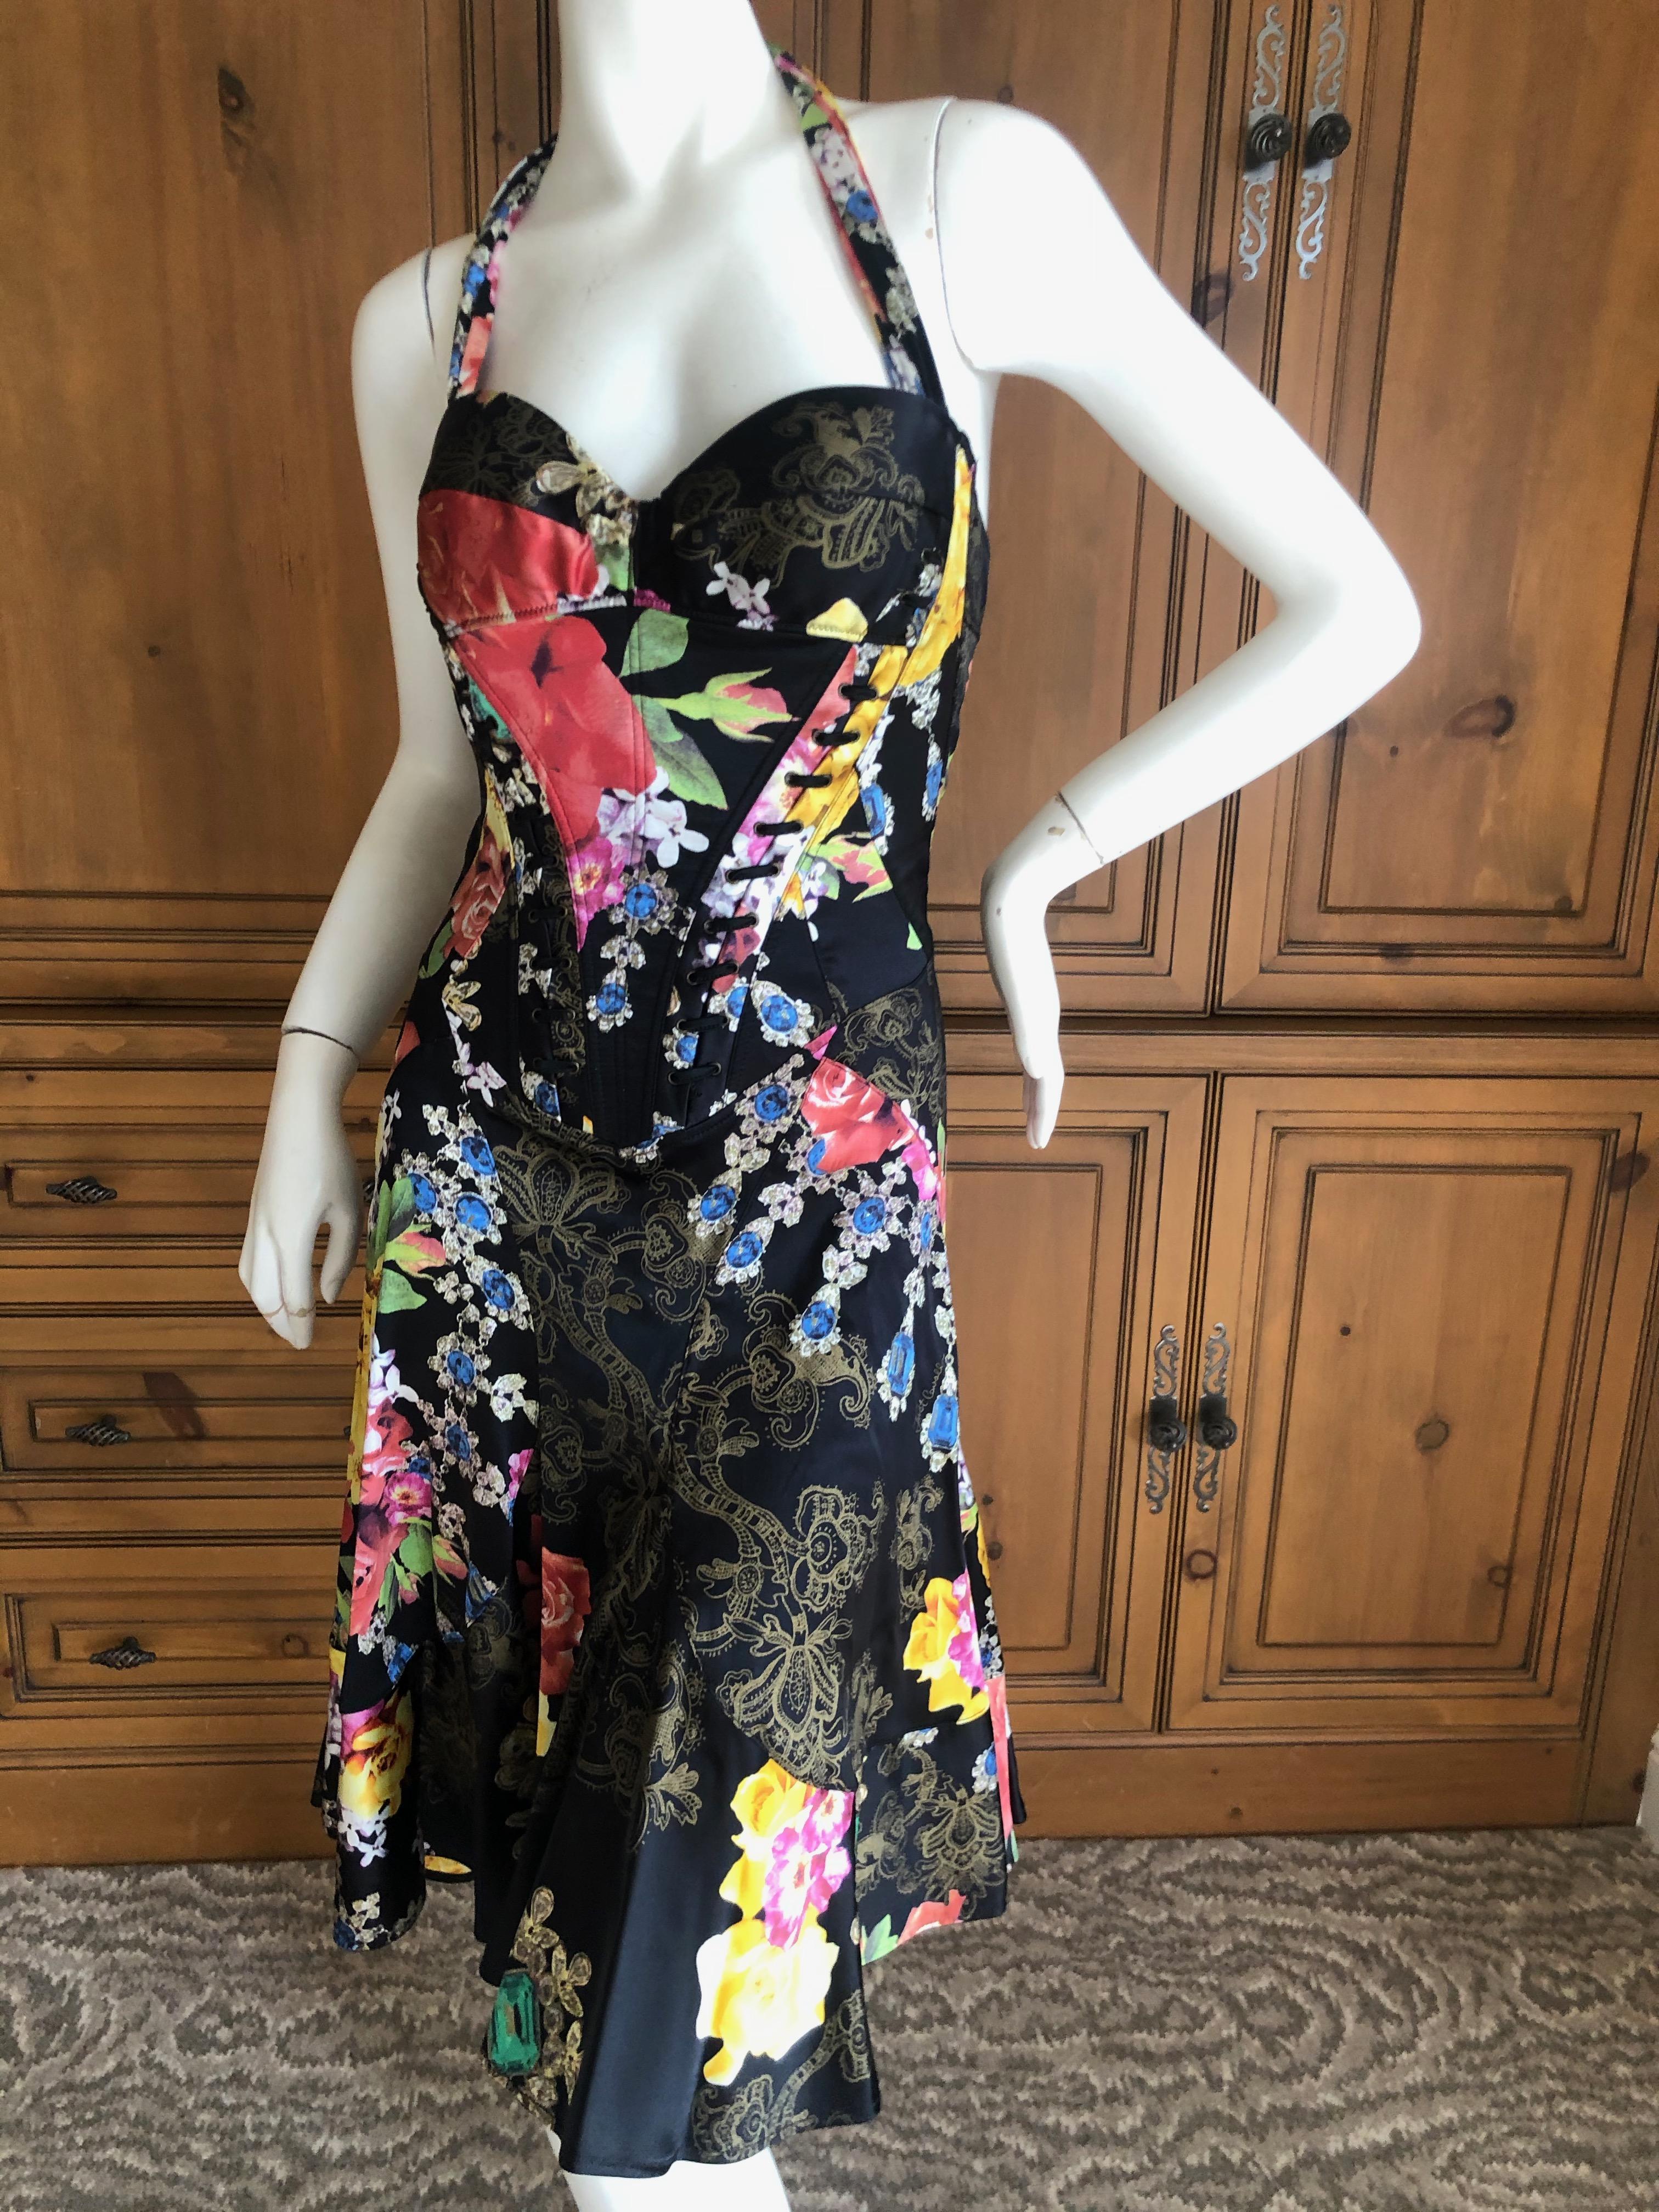 Roberto Cavalli for Just Cavalli Floral Dress with Corset Like Details. 
This is so pretty, with a lot of stretch.
Size 42
Bust 36